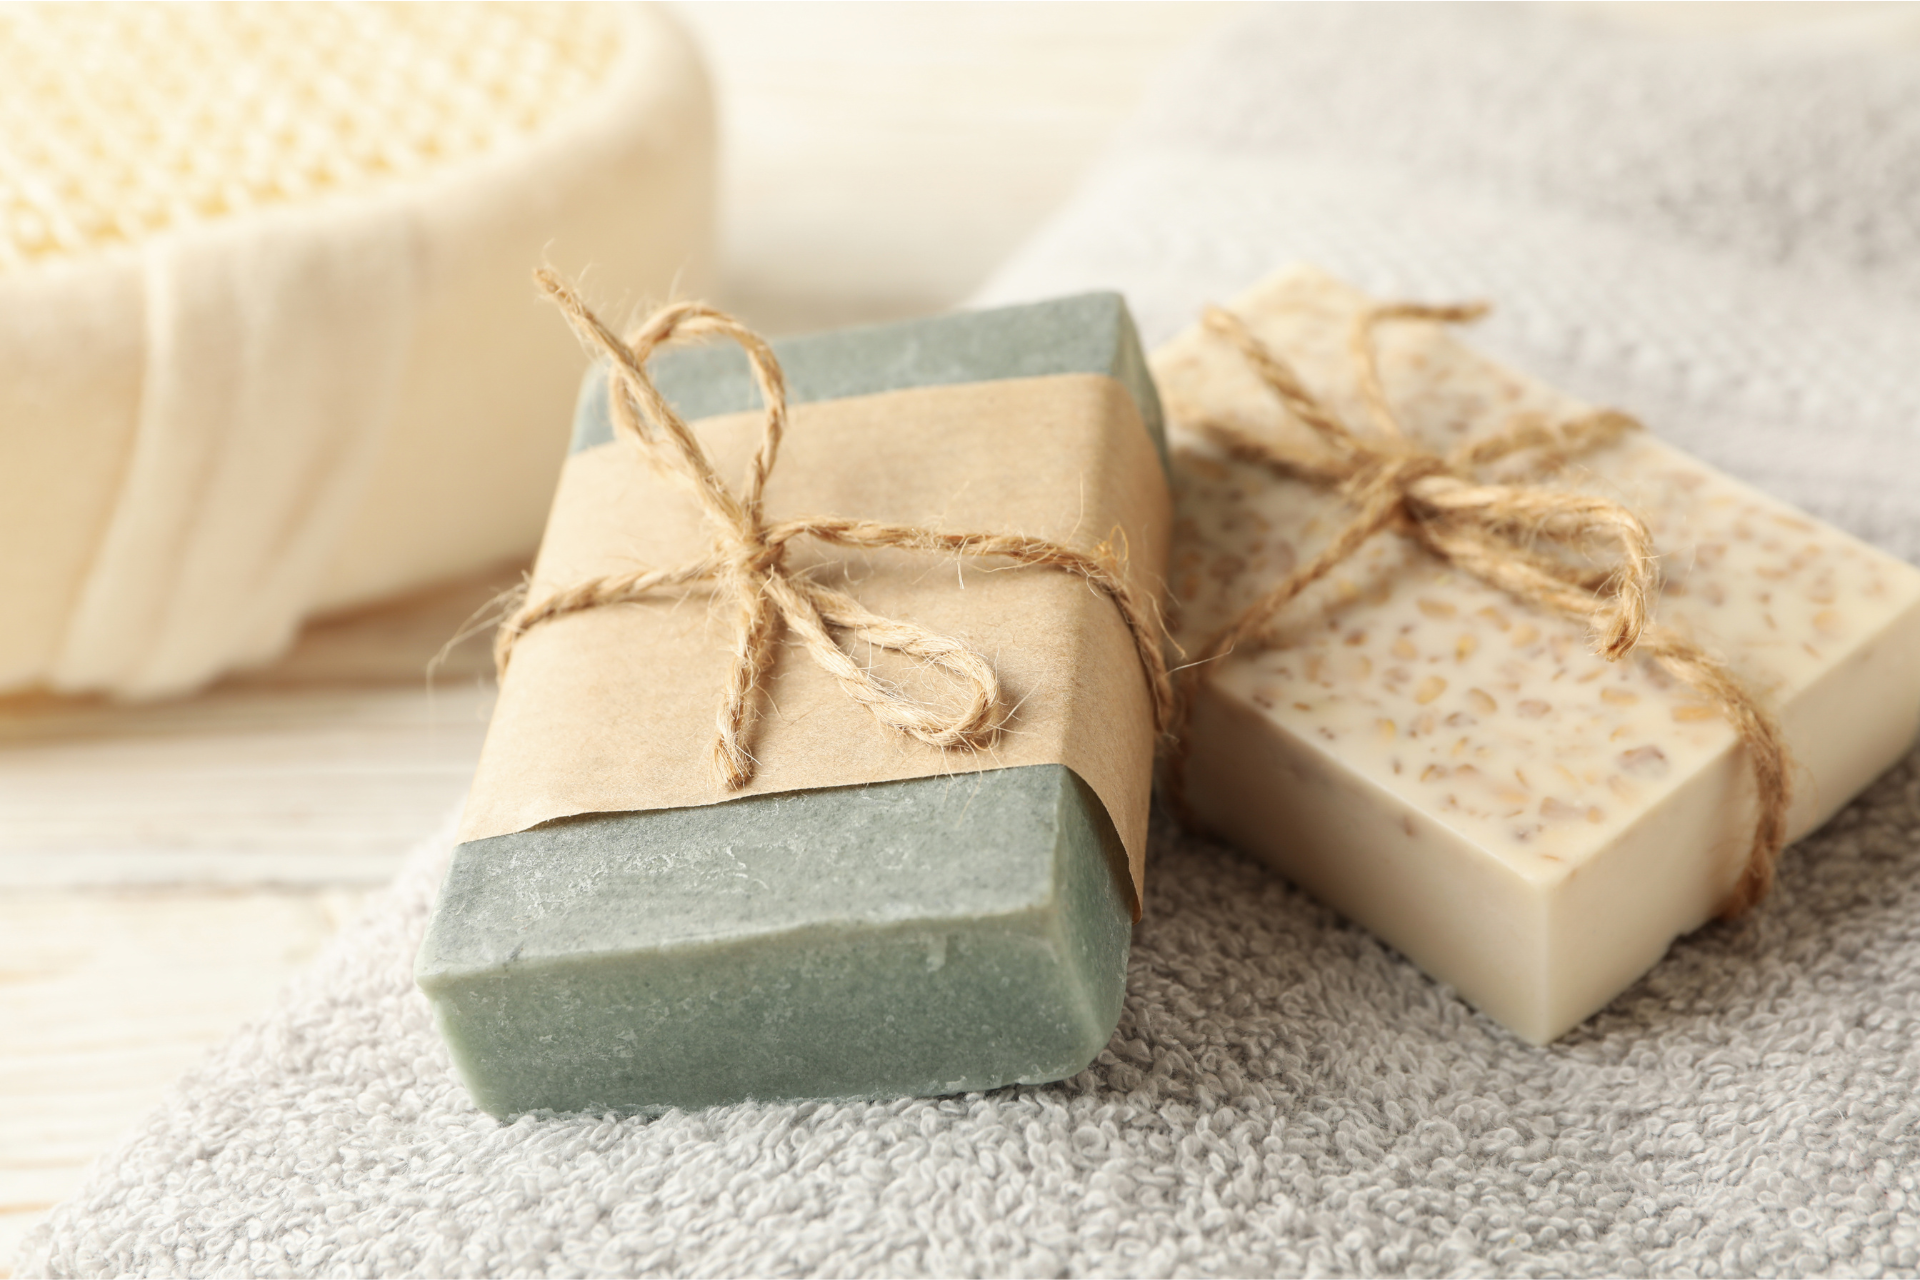 All-natural soap